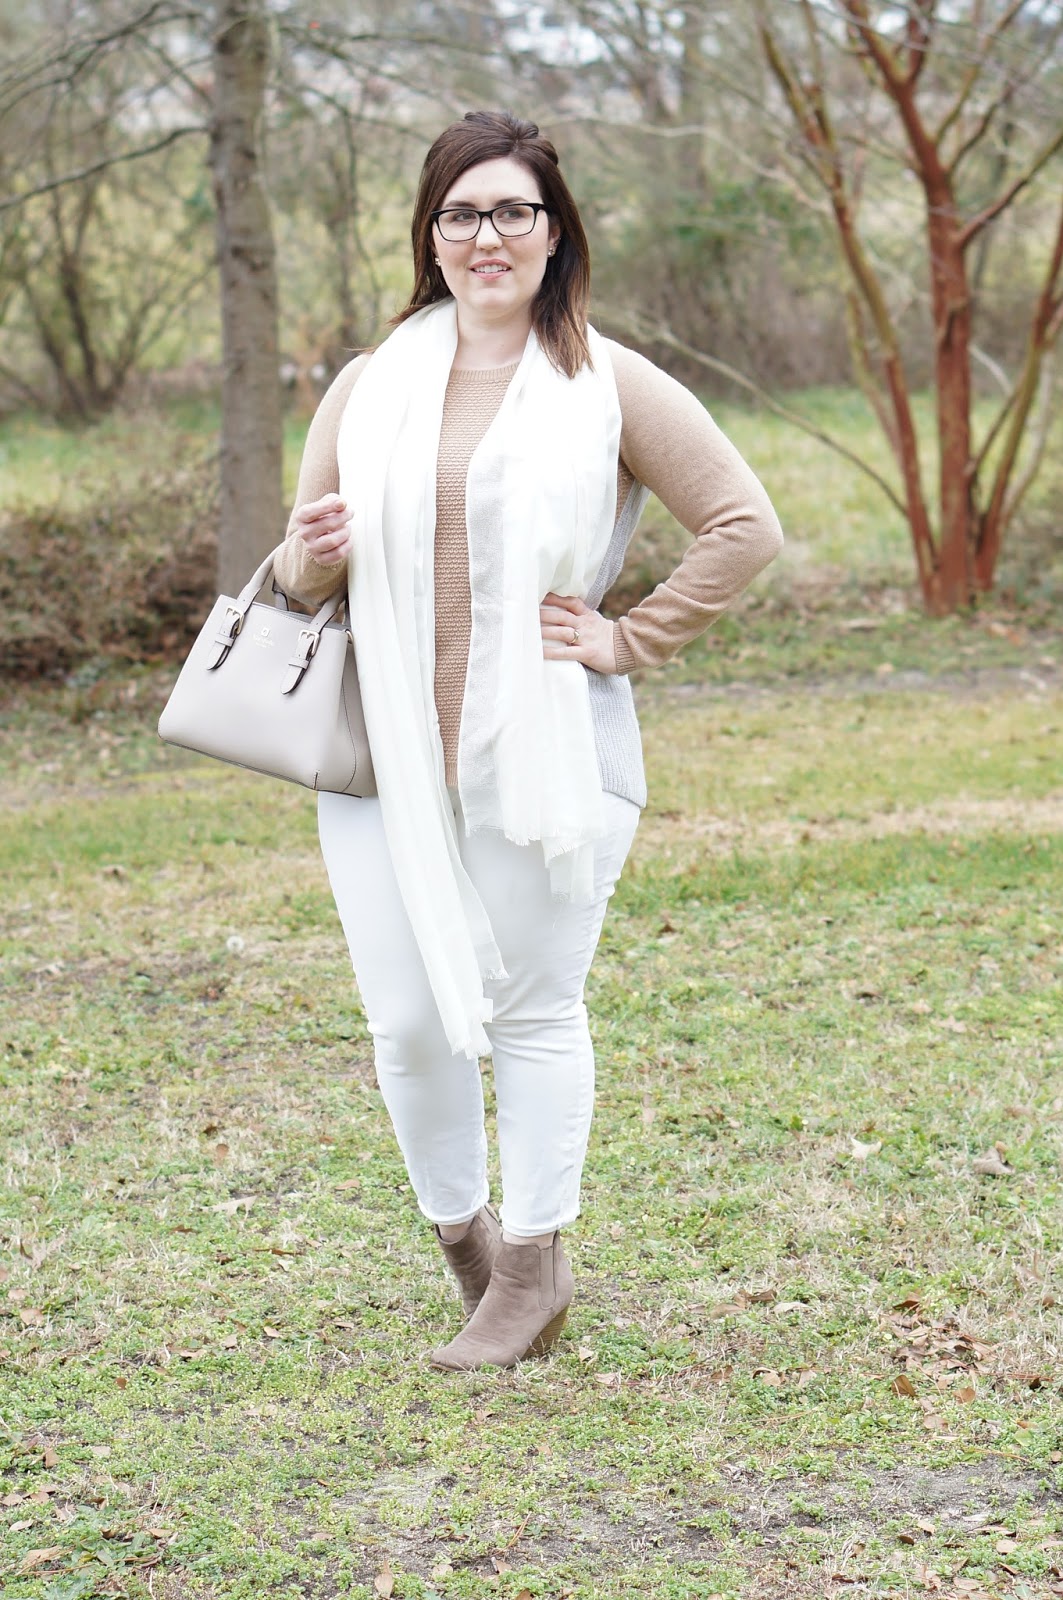 Rebecca Lately Winter Whites Loft Sweater Ann Taylor Skinny Curvy Jeans Taupe Booties Kate Spade Cove Street Provence Kate Spade Earrings